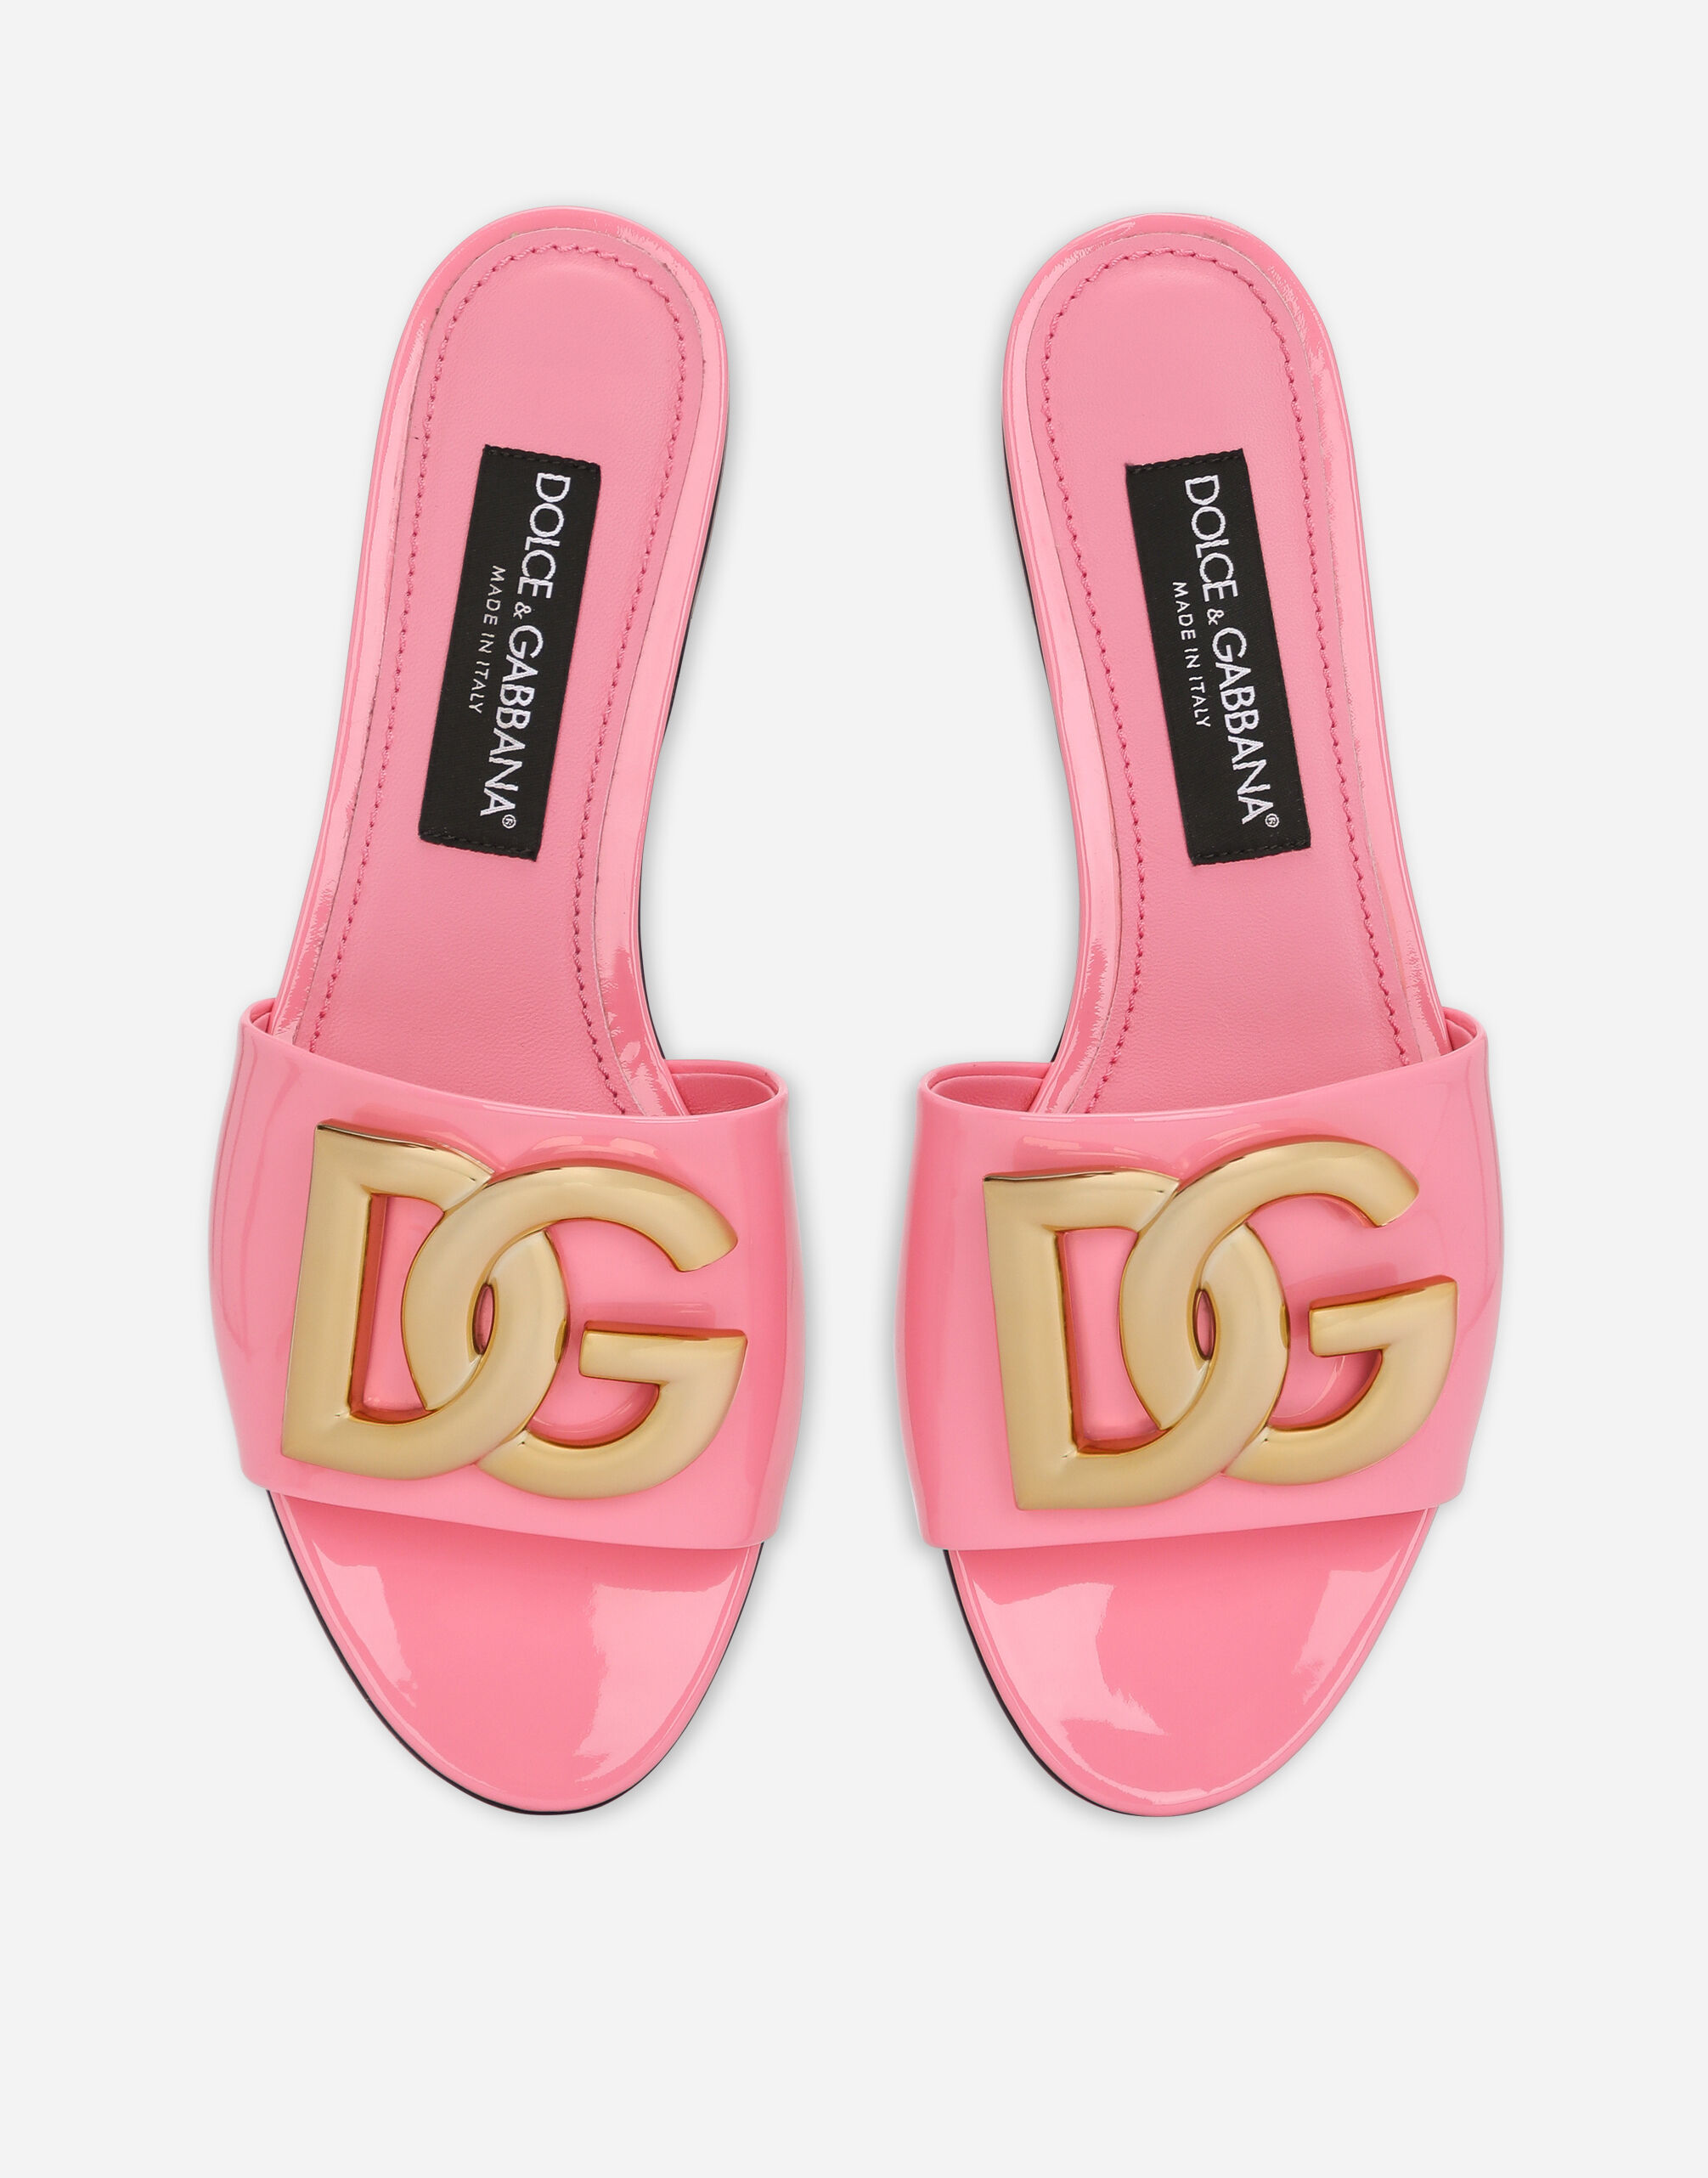 Patent leather sliders with DG logo